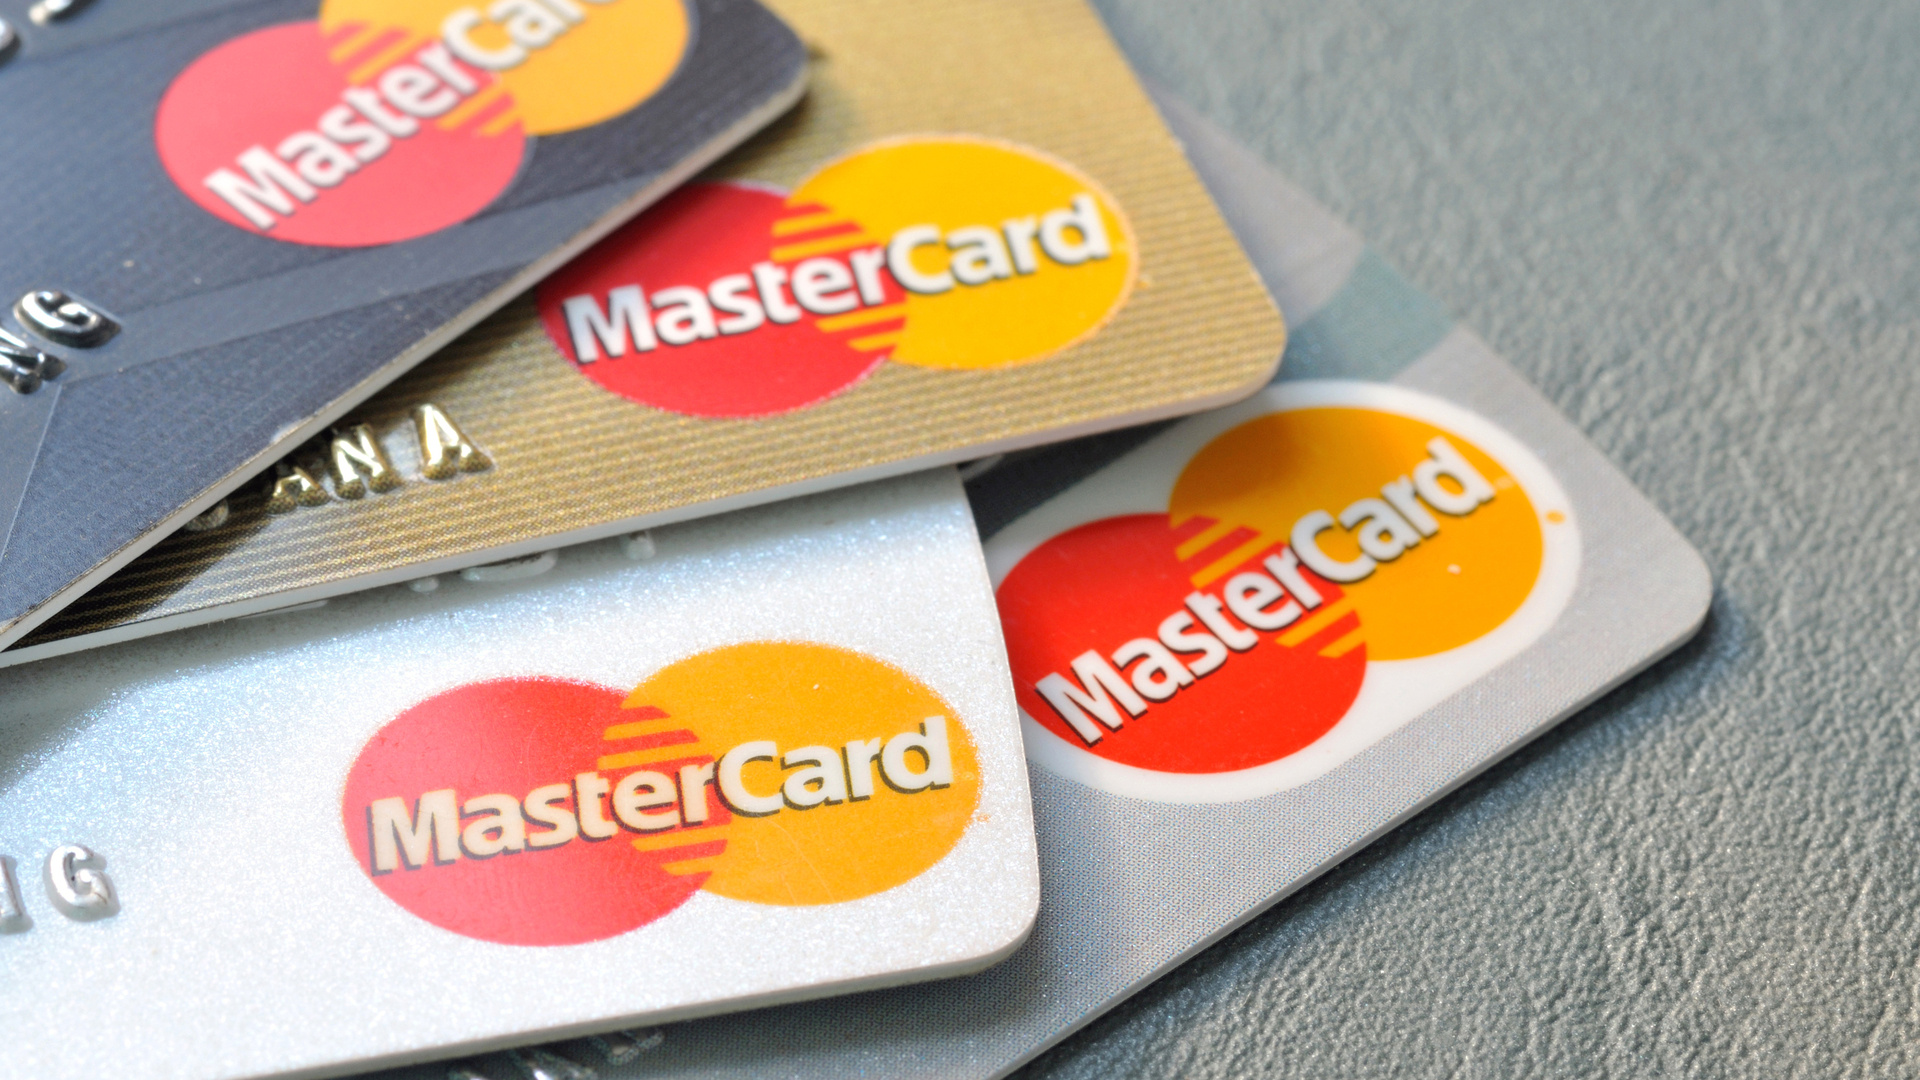 Mastercard: Debit cards allowing an instant withdrawal of cash, A global pioneer in payment innovation and technology. 1920x1080 Full HD Wallpaper.